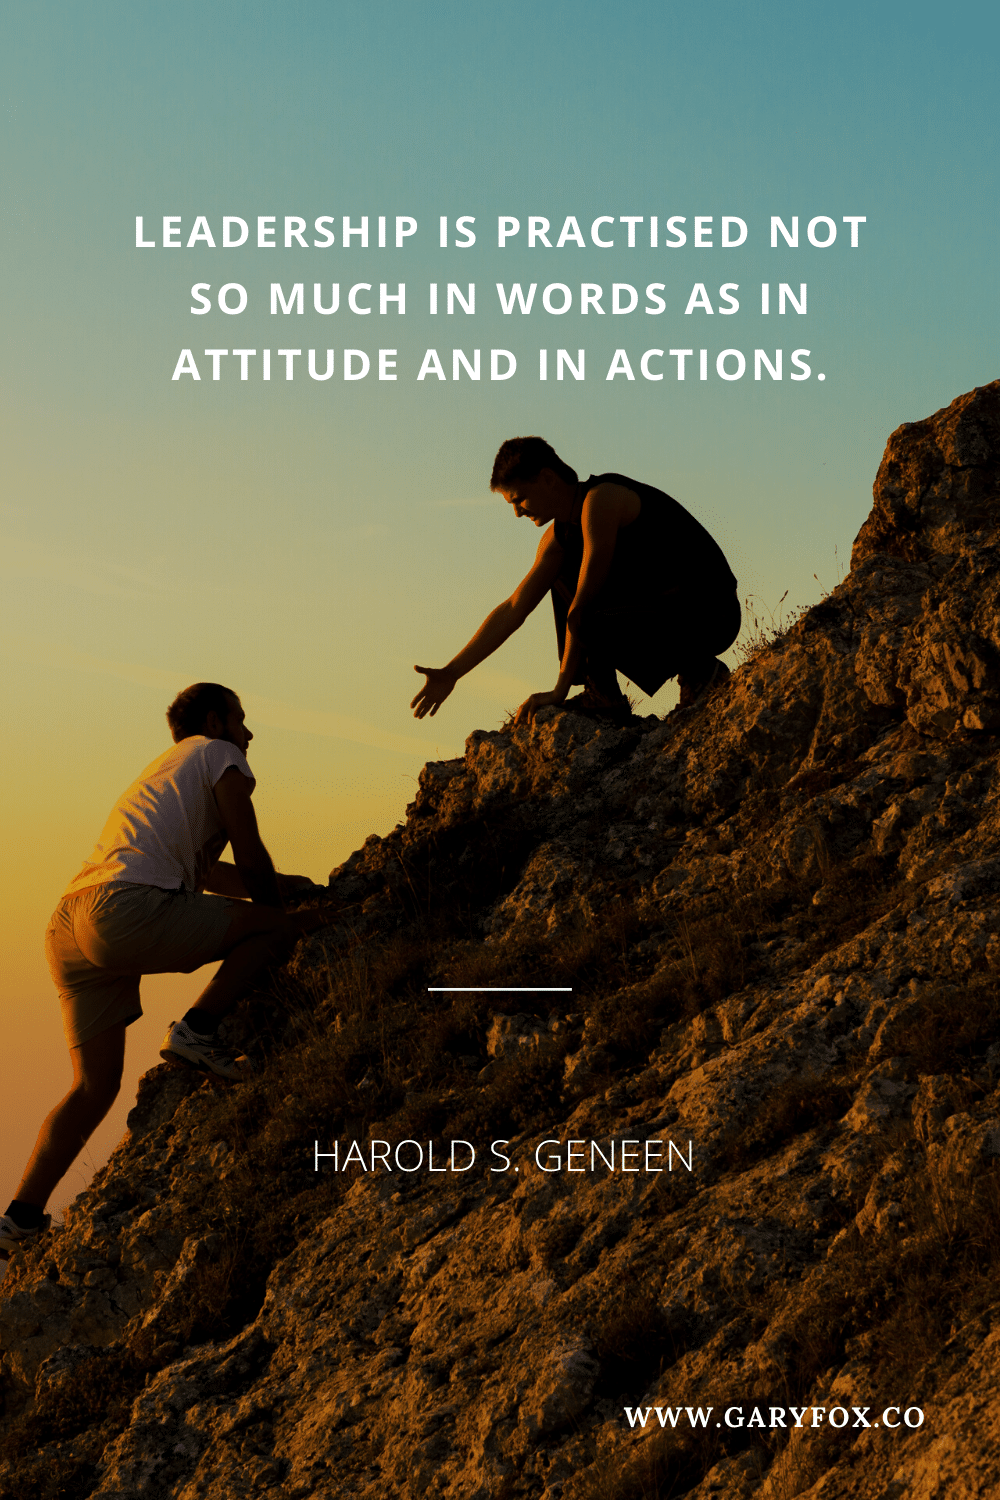 Leadership Is Practised Not So Much In Words As In Attitude And In Actions. - Harold S. Geneen